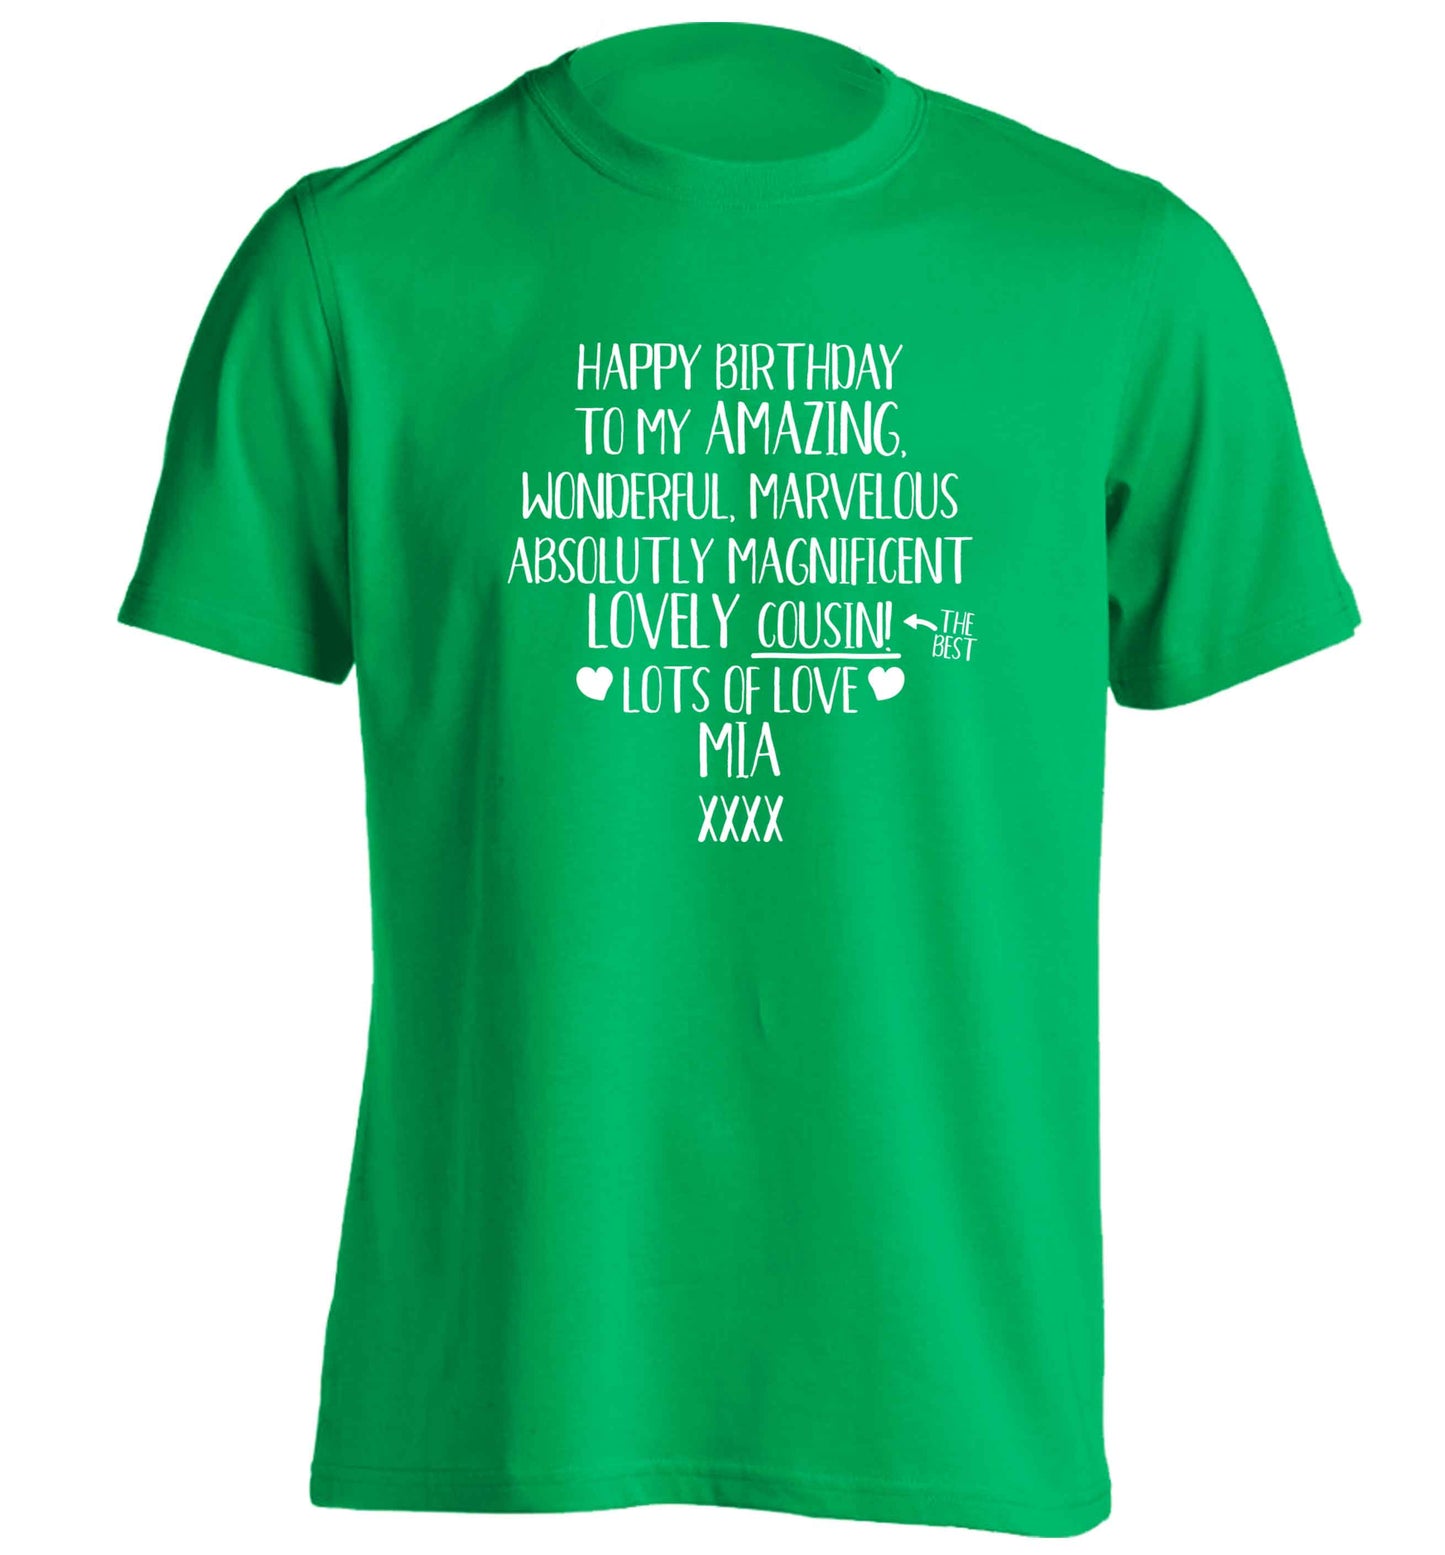 Personalised happy birthday to my amazing, wonderful, lovely cousin adults unisex green Tshirt 2XL